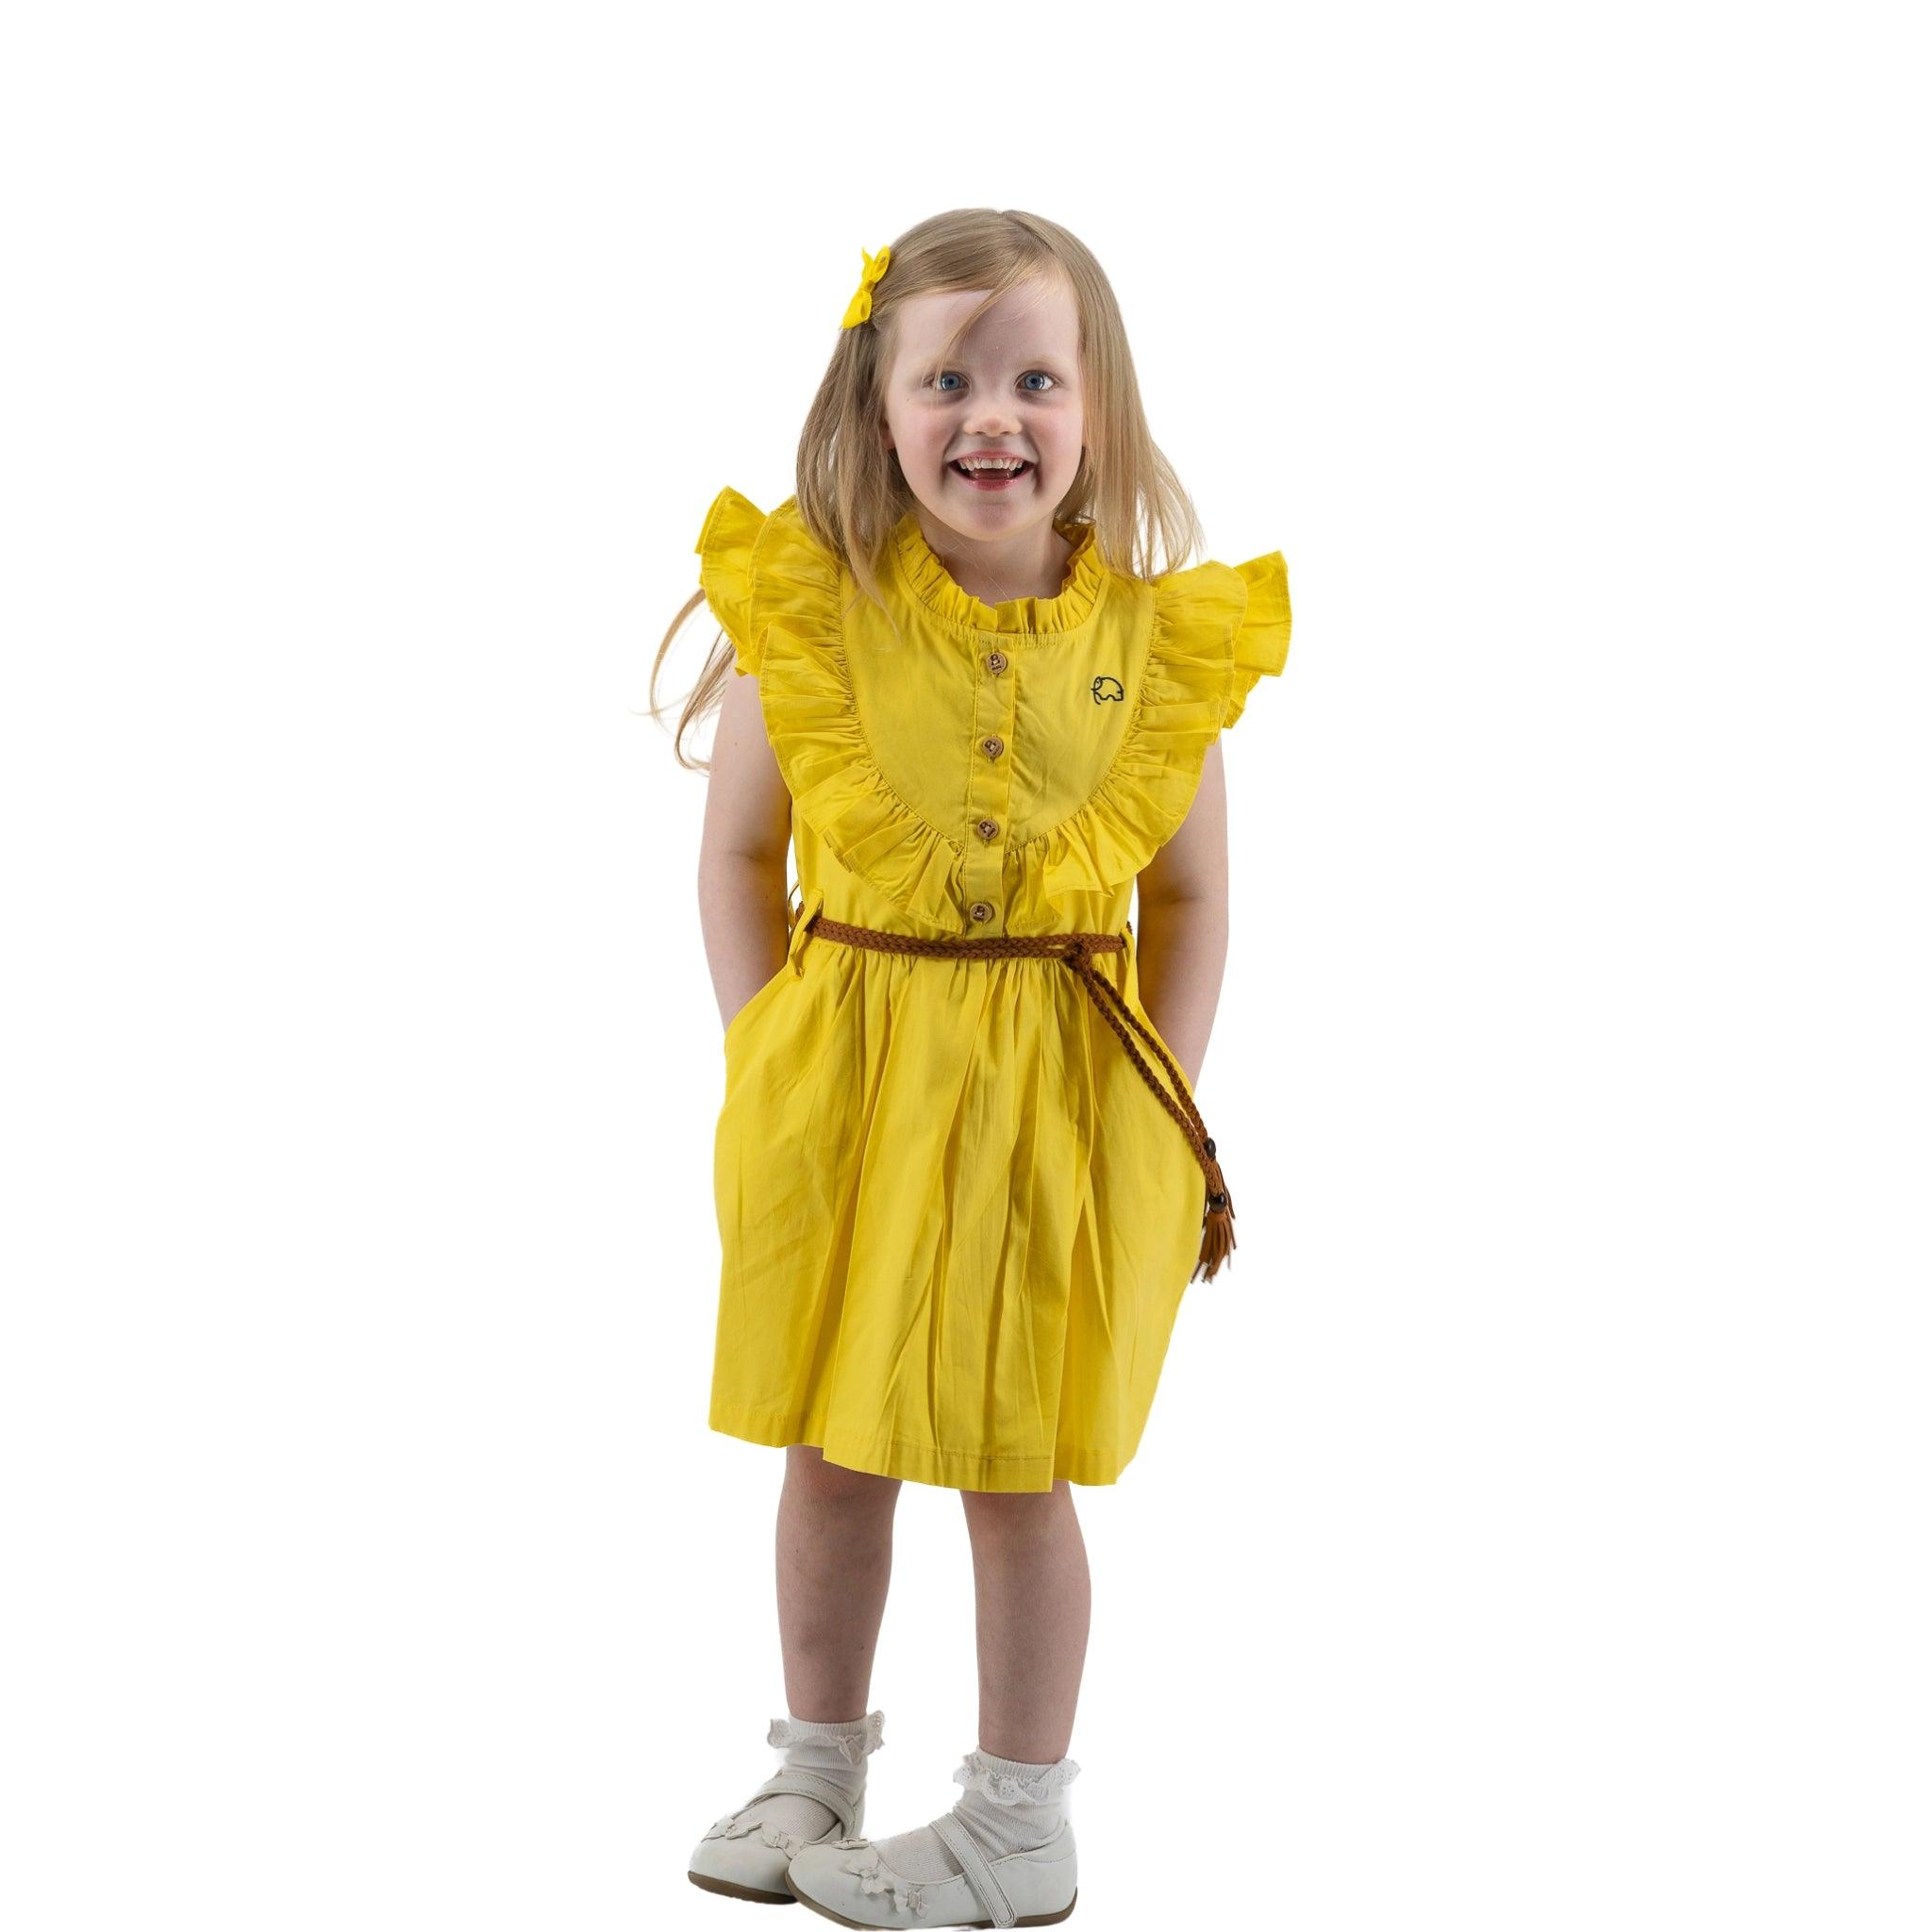 A young girl wearing a Karee yellow butterfly sleeve cotton dress for girls and white shoes smiles while posing with her hands on her hips, isolated on a white background.